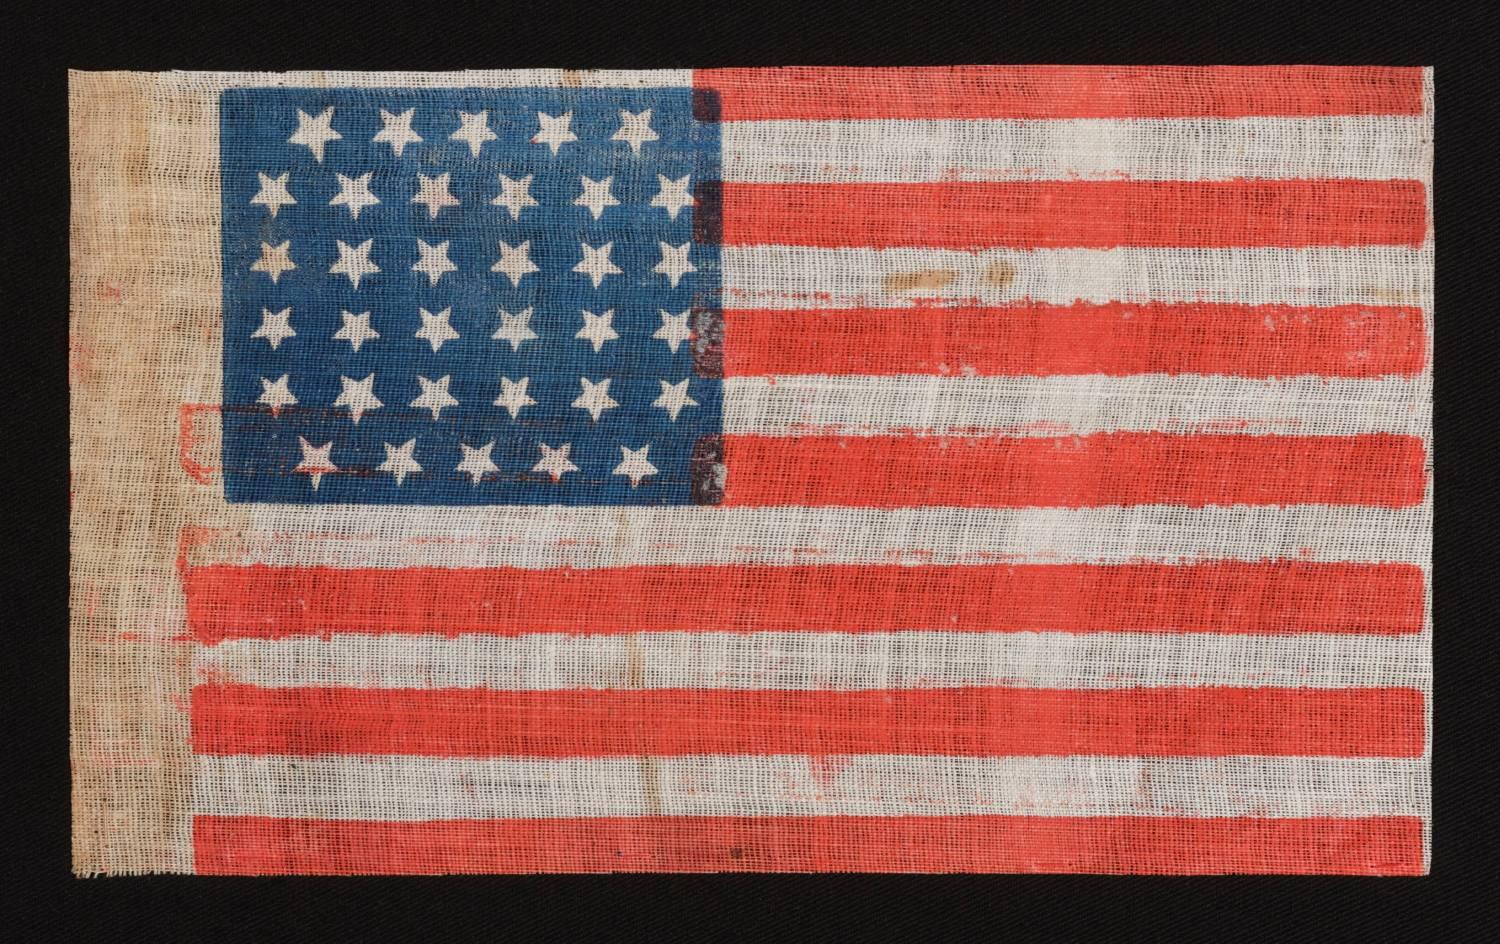 34 STARS IN A LINEAL ARRANGEMENT THAT RESULTS IN A CONFIGURATION THAT I HAVE TERMED "GLOBAL ROWS," MADE DURING THE OPENING TWO YEARS OF THE CIVIL WAR, 1861-63, KANSAS STATEHOOD: 

34 star American national flag, printed on fine, glazed